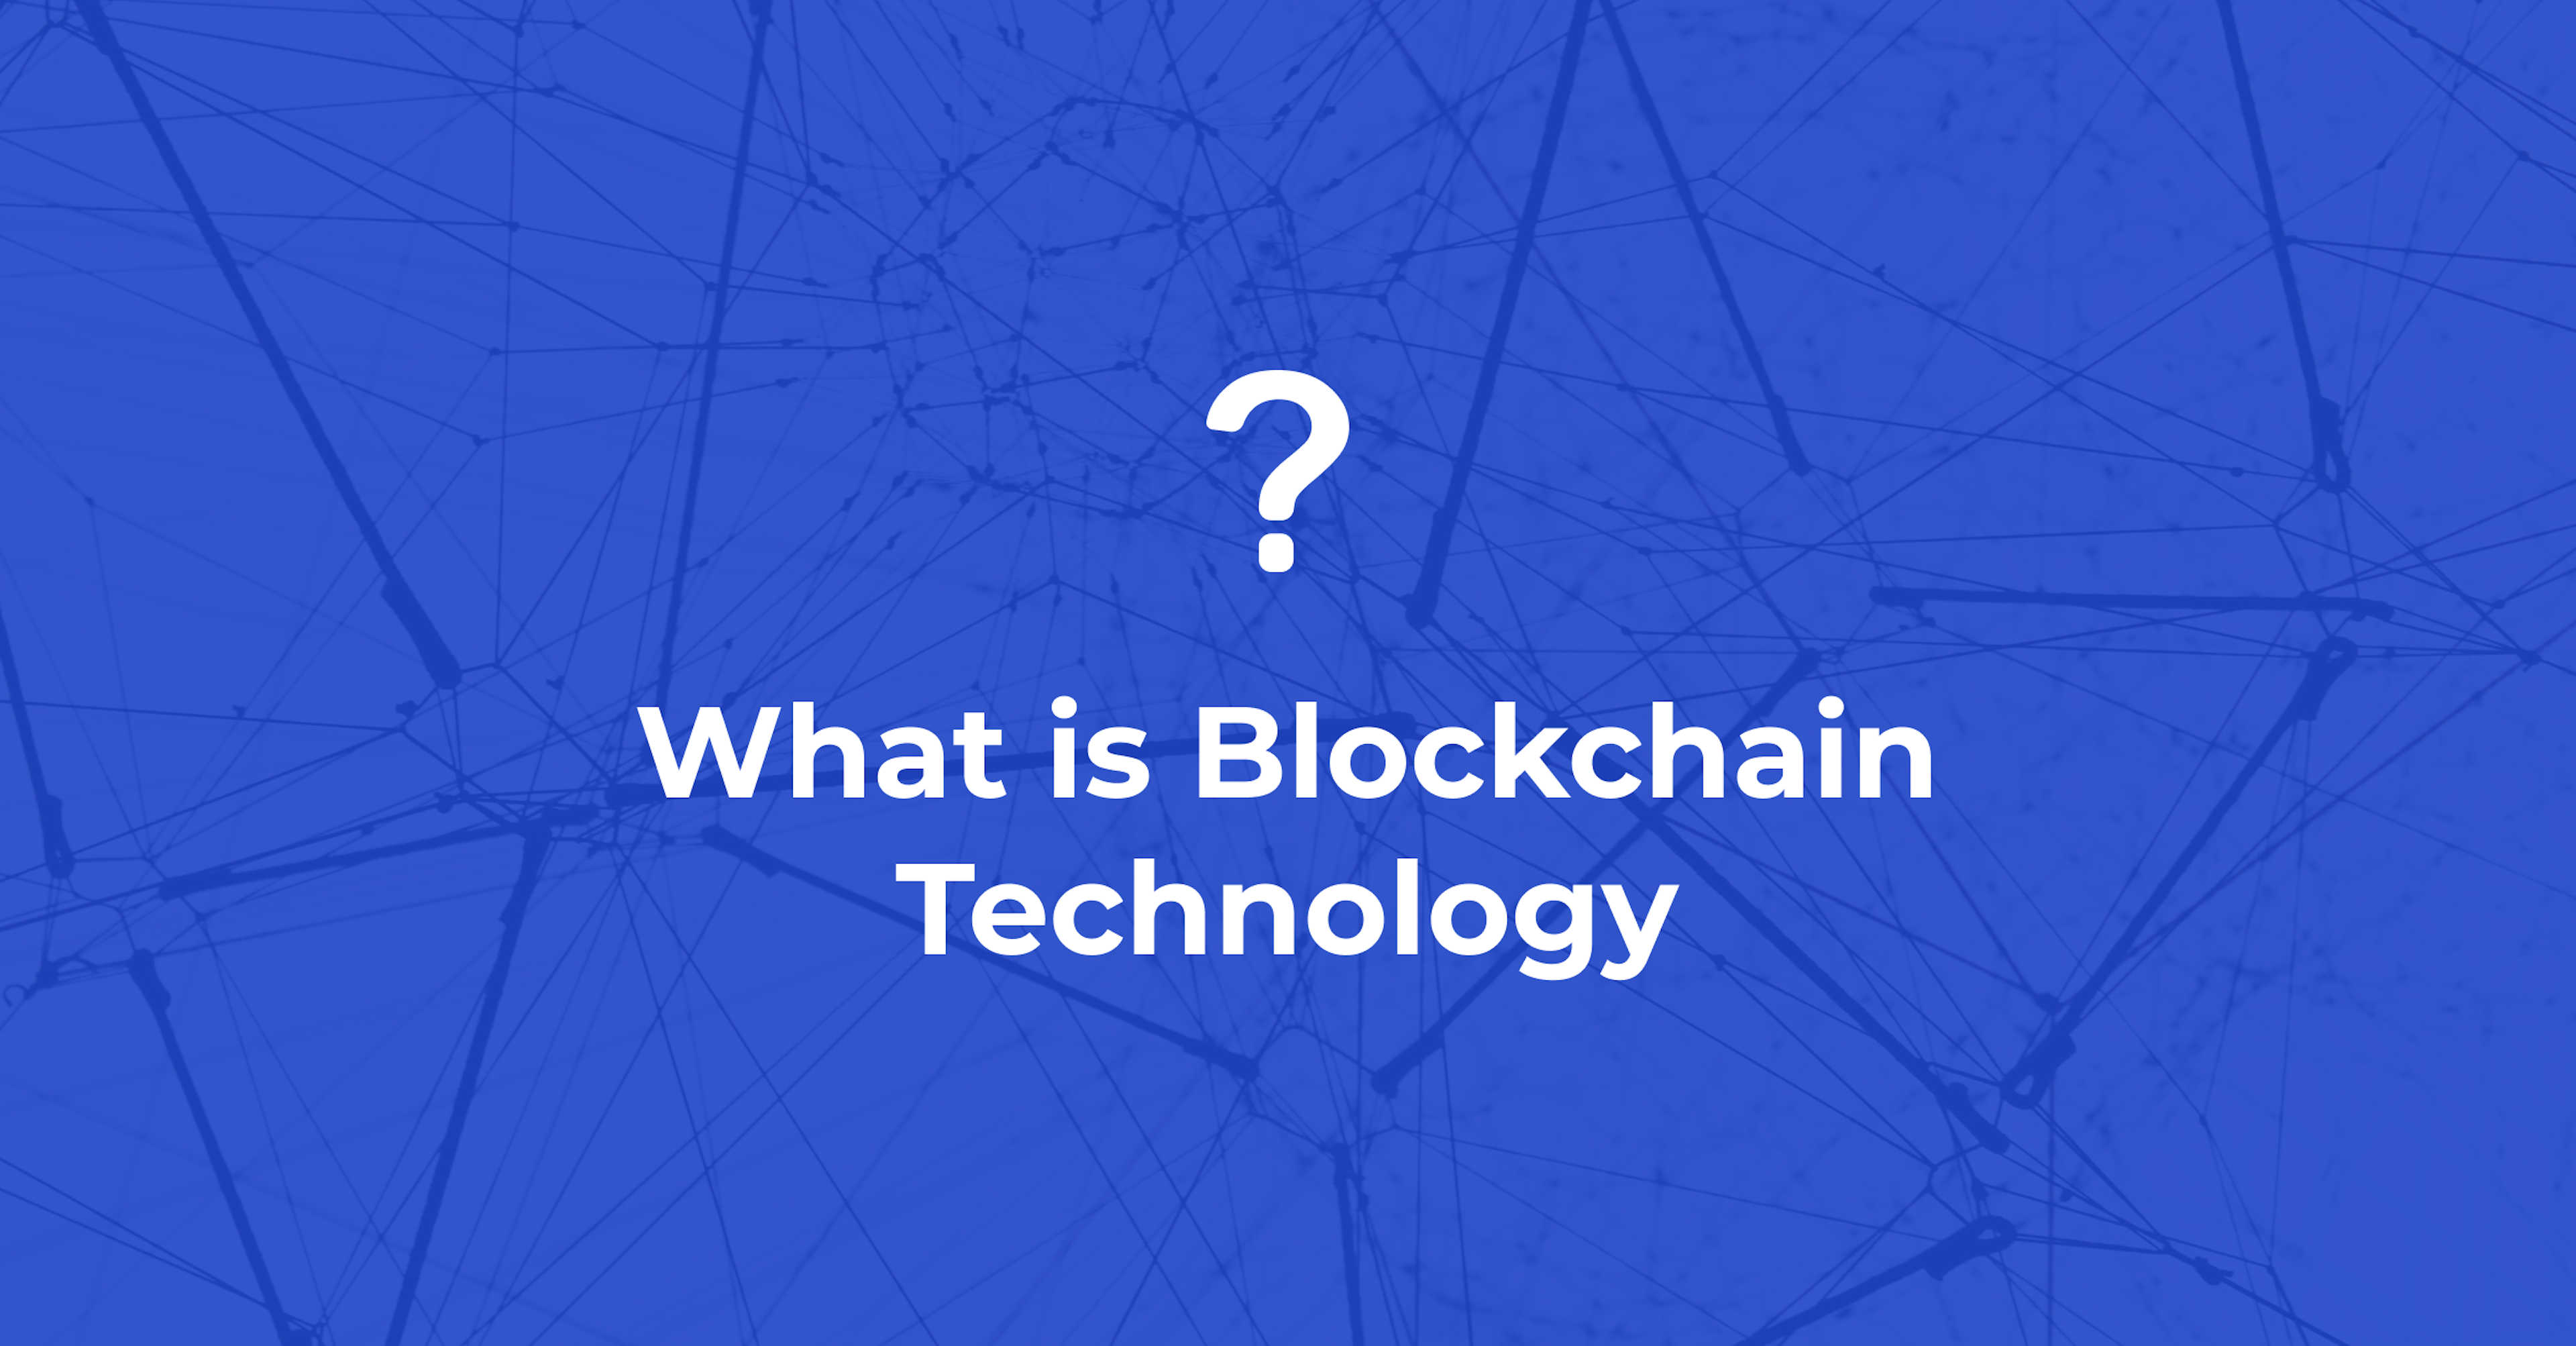 What is Blockchain Technology? A Simple and Detailed Explanation